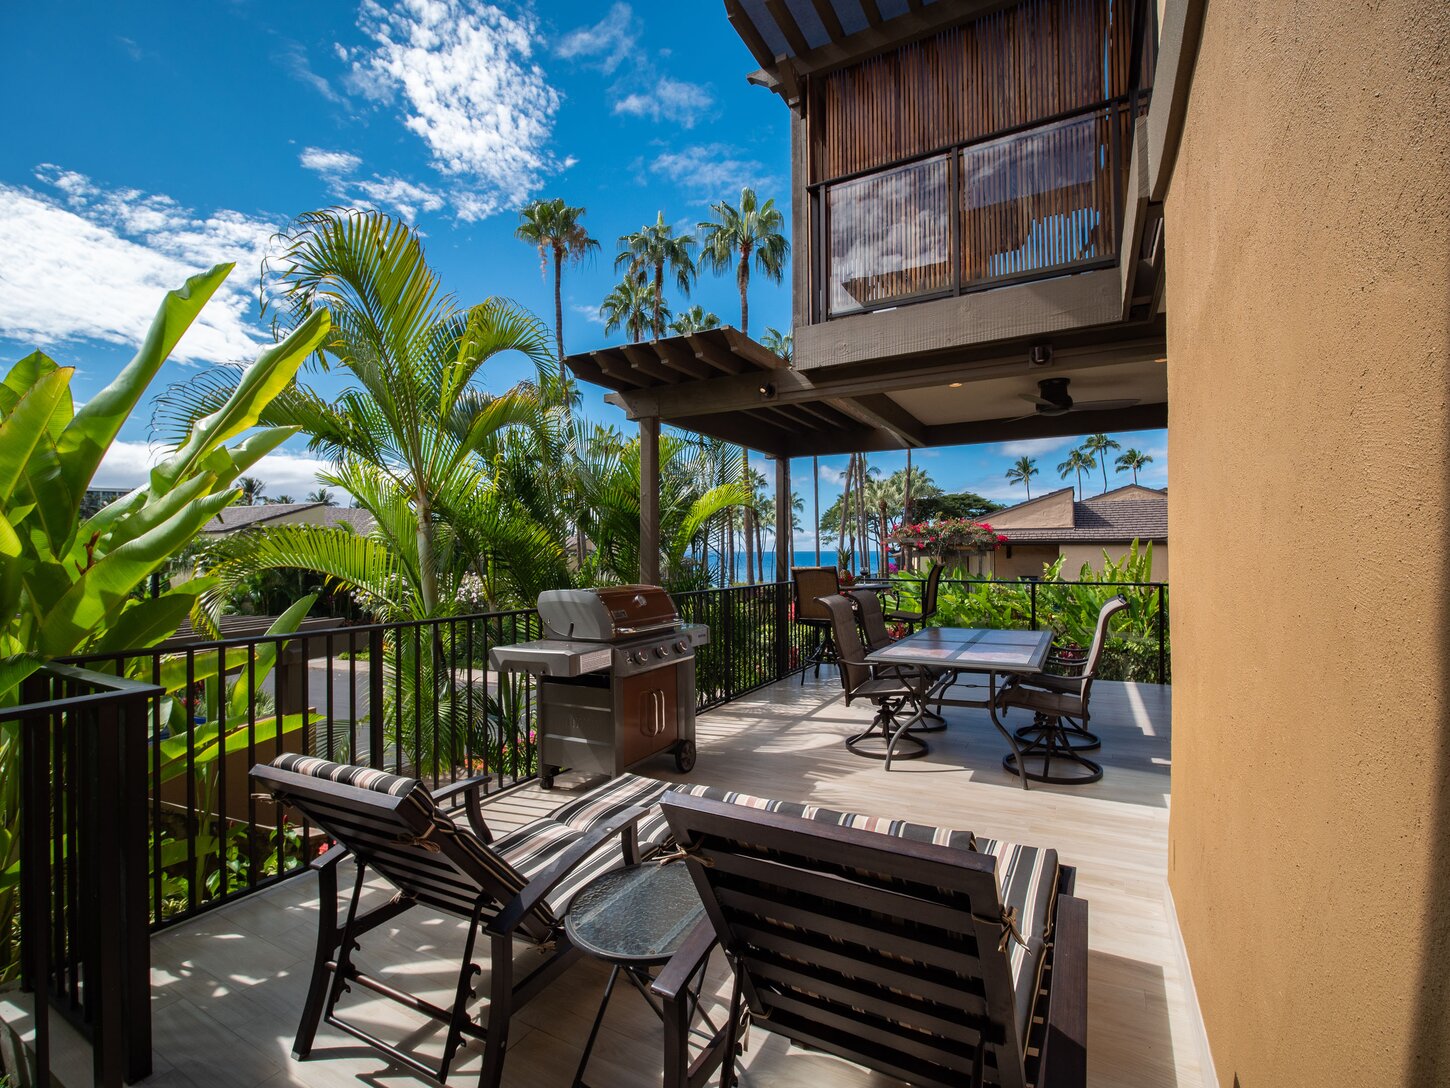 Lanai features chaise lounges and a large dining table